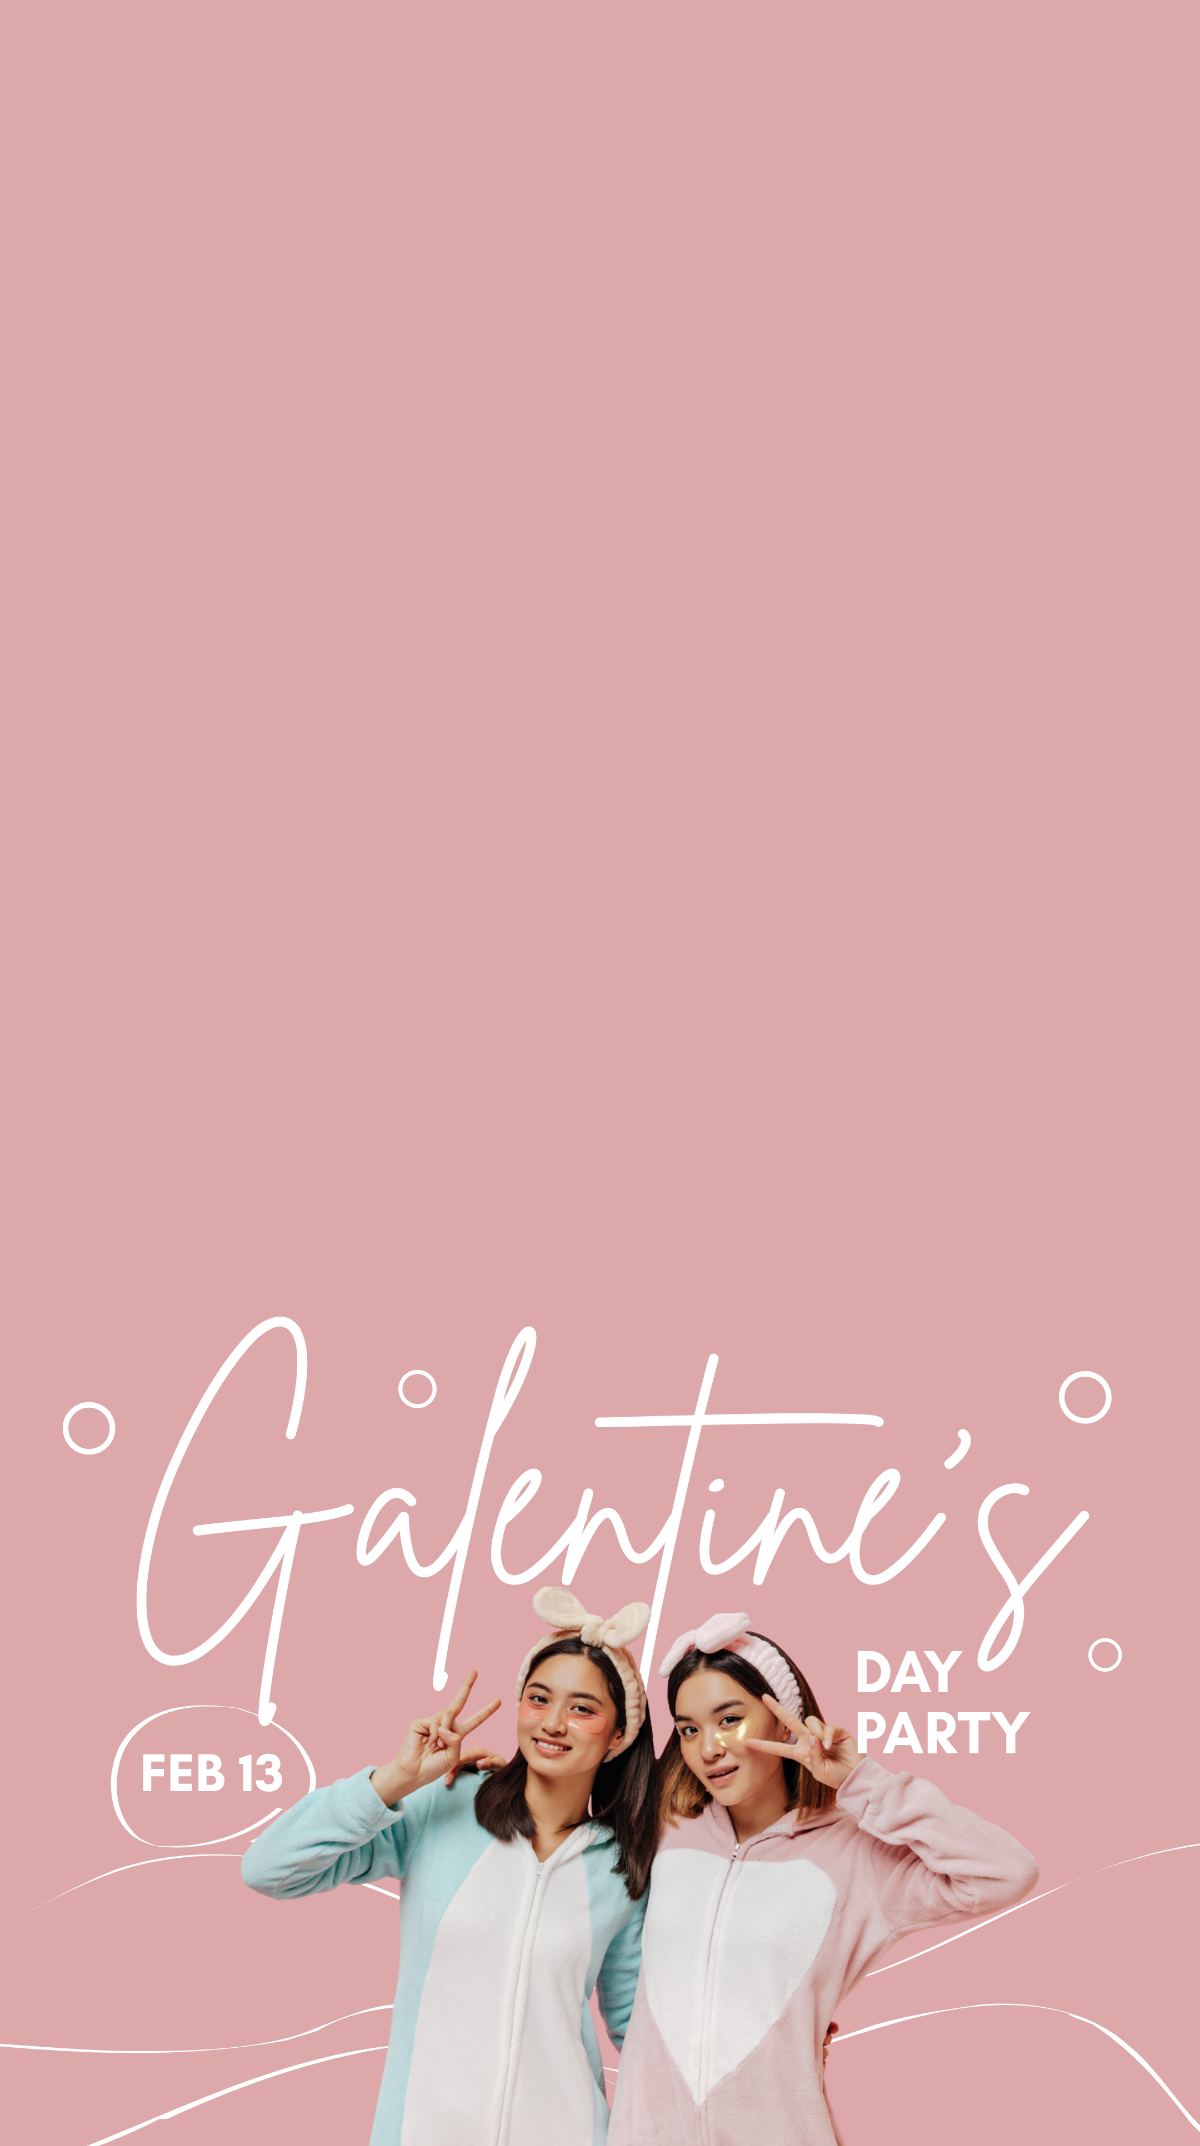 Free Galentines Day Party Snapchat Geofilter Template